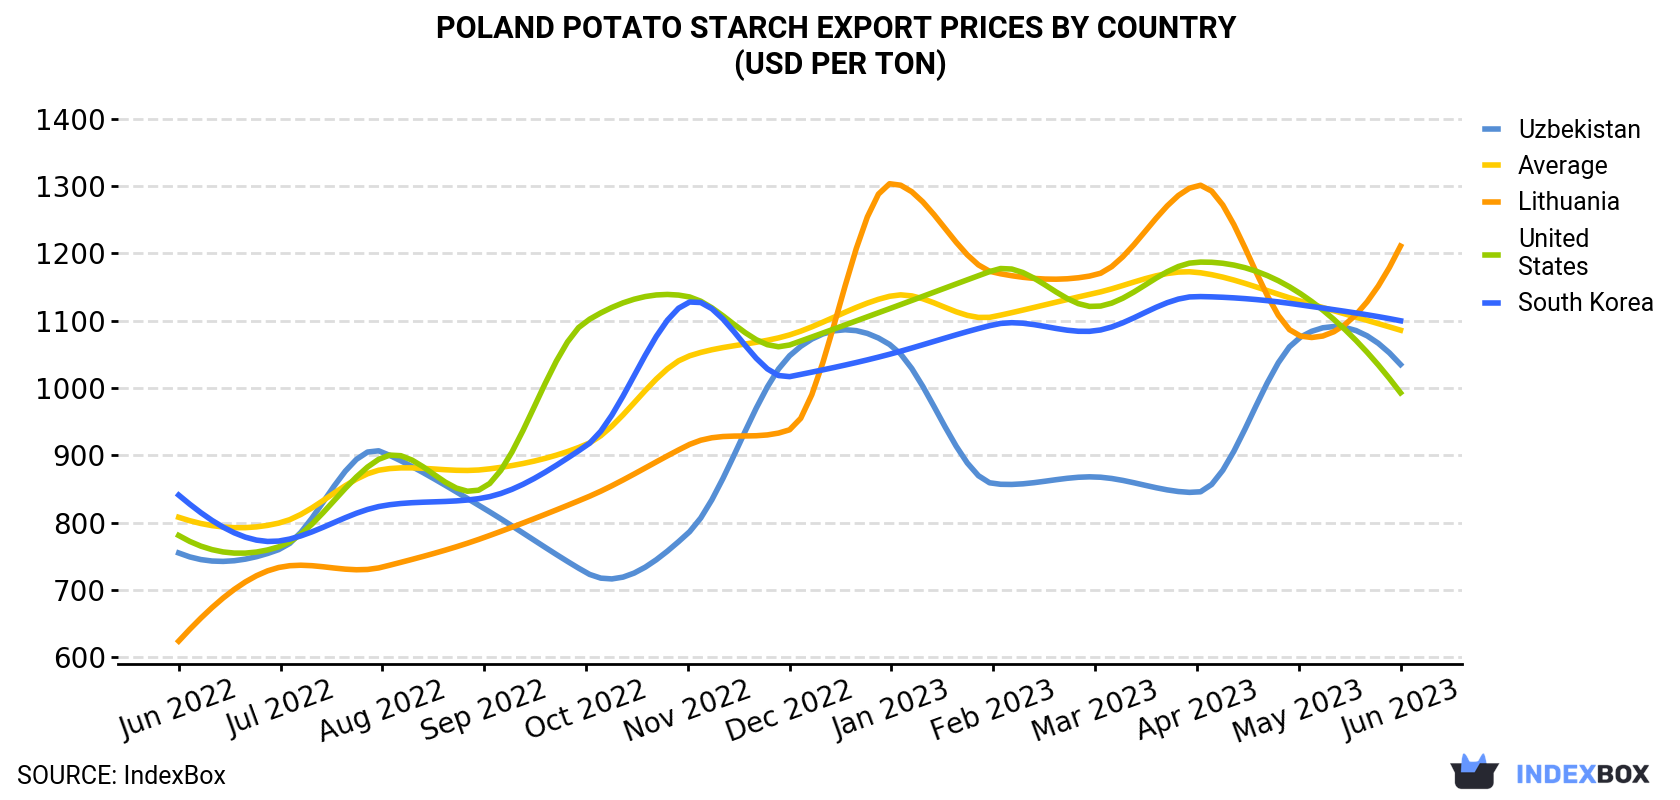 Poland Potato Starch Export Prices By Country (USD Per Ton)